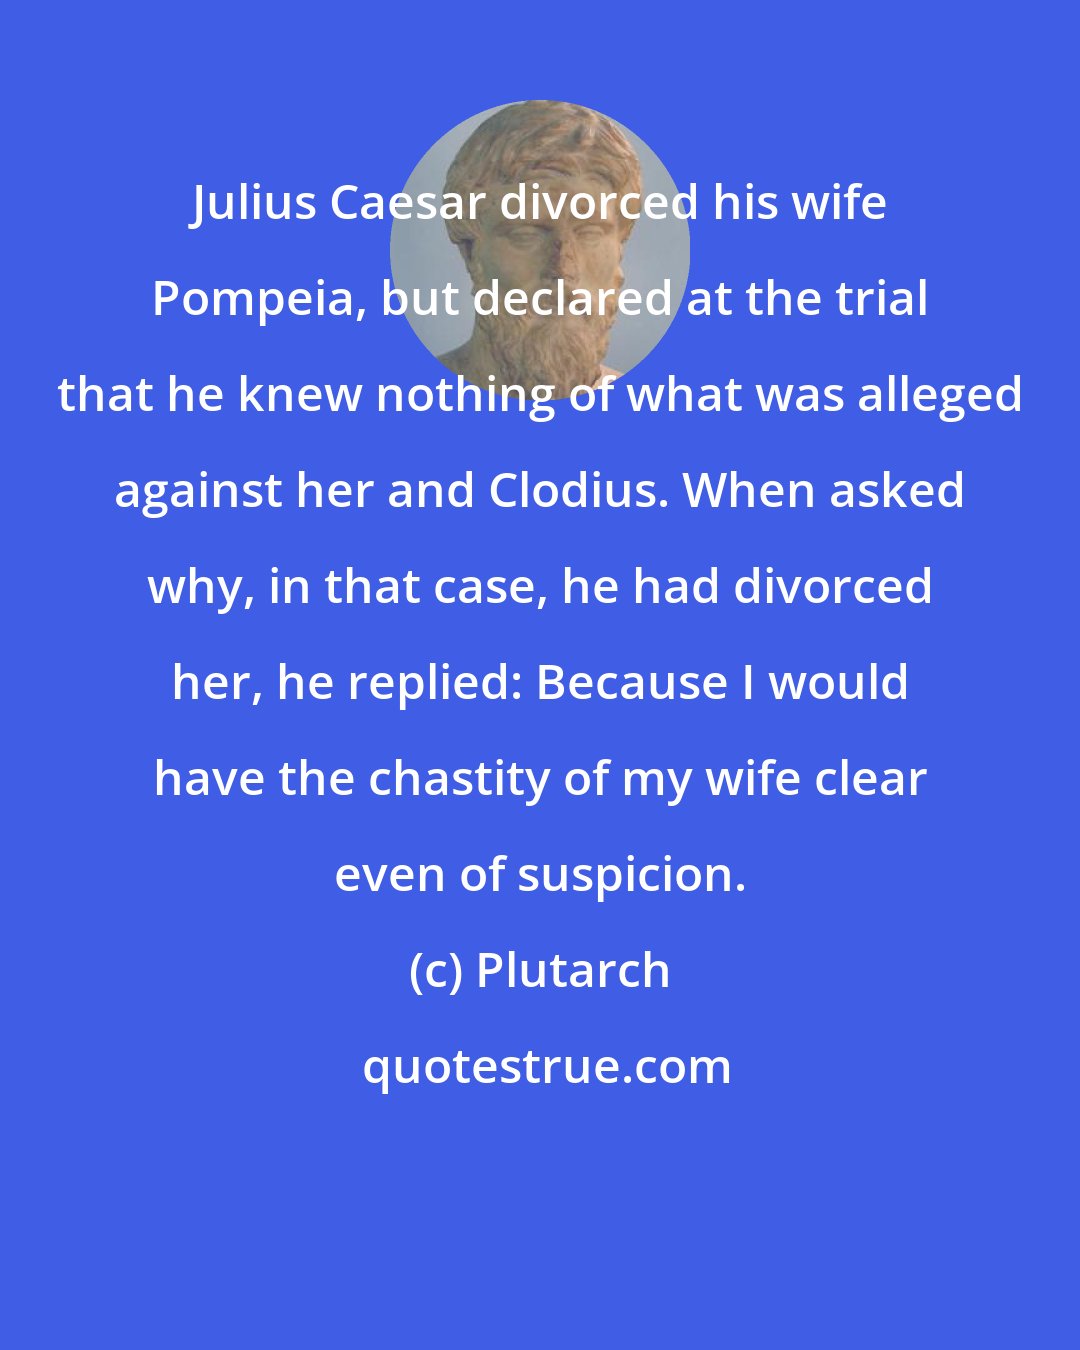 Plutarch: Julius Caesar divorced his wife Pompeia, but declared at the trial that he knew nothing of what was alleged against her and Clodius. When asked why, in that case, he had divorced her, he replied: Because I would have the chastity of my wife clear even of suspicion.